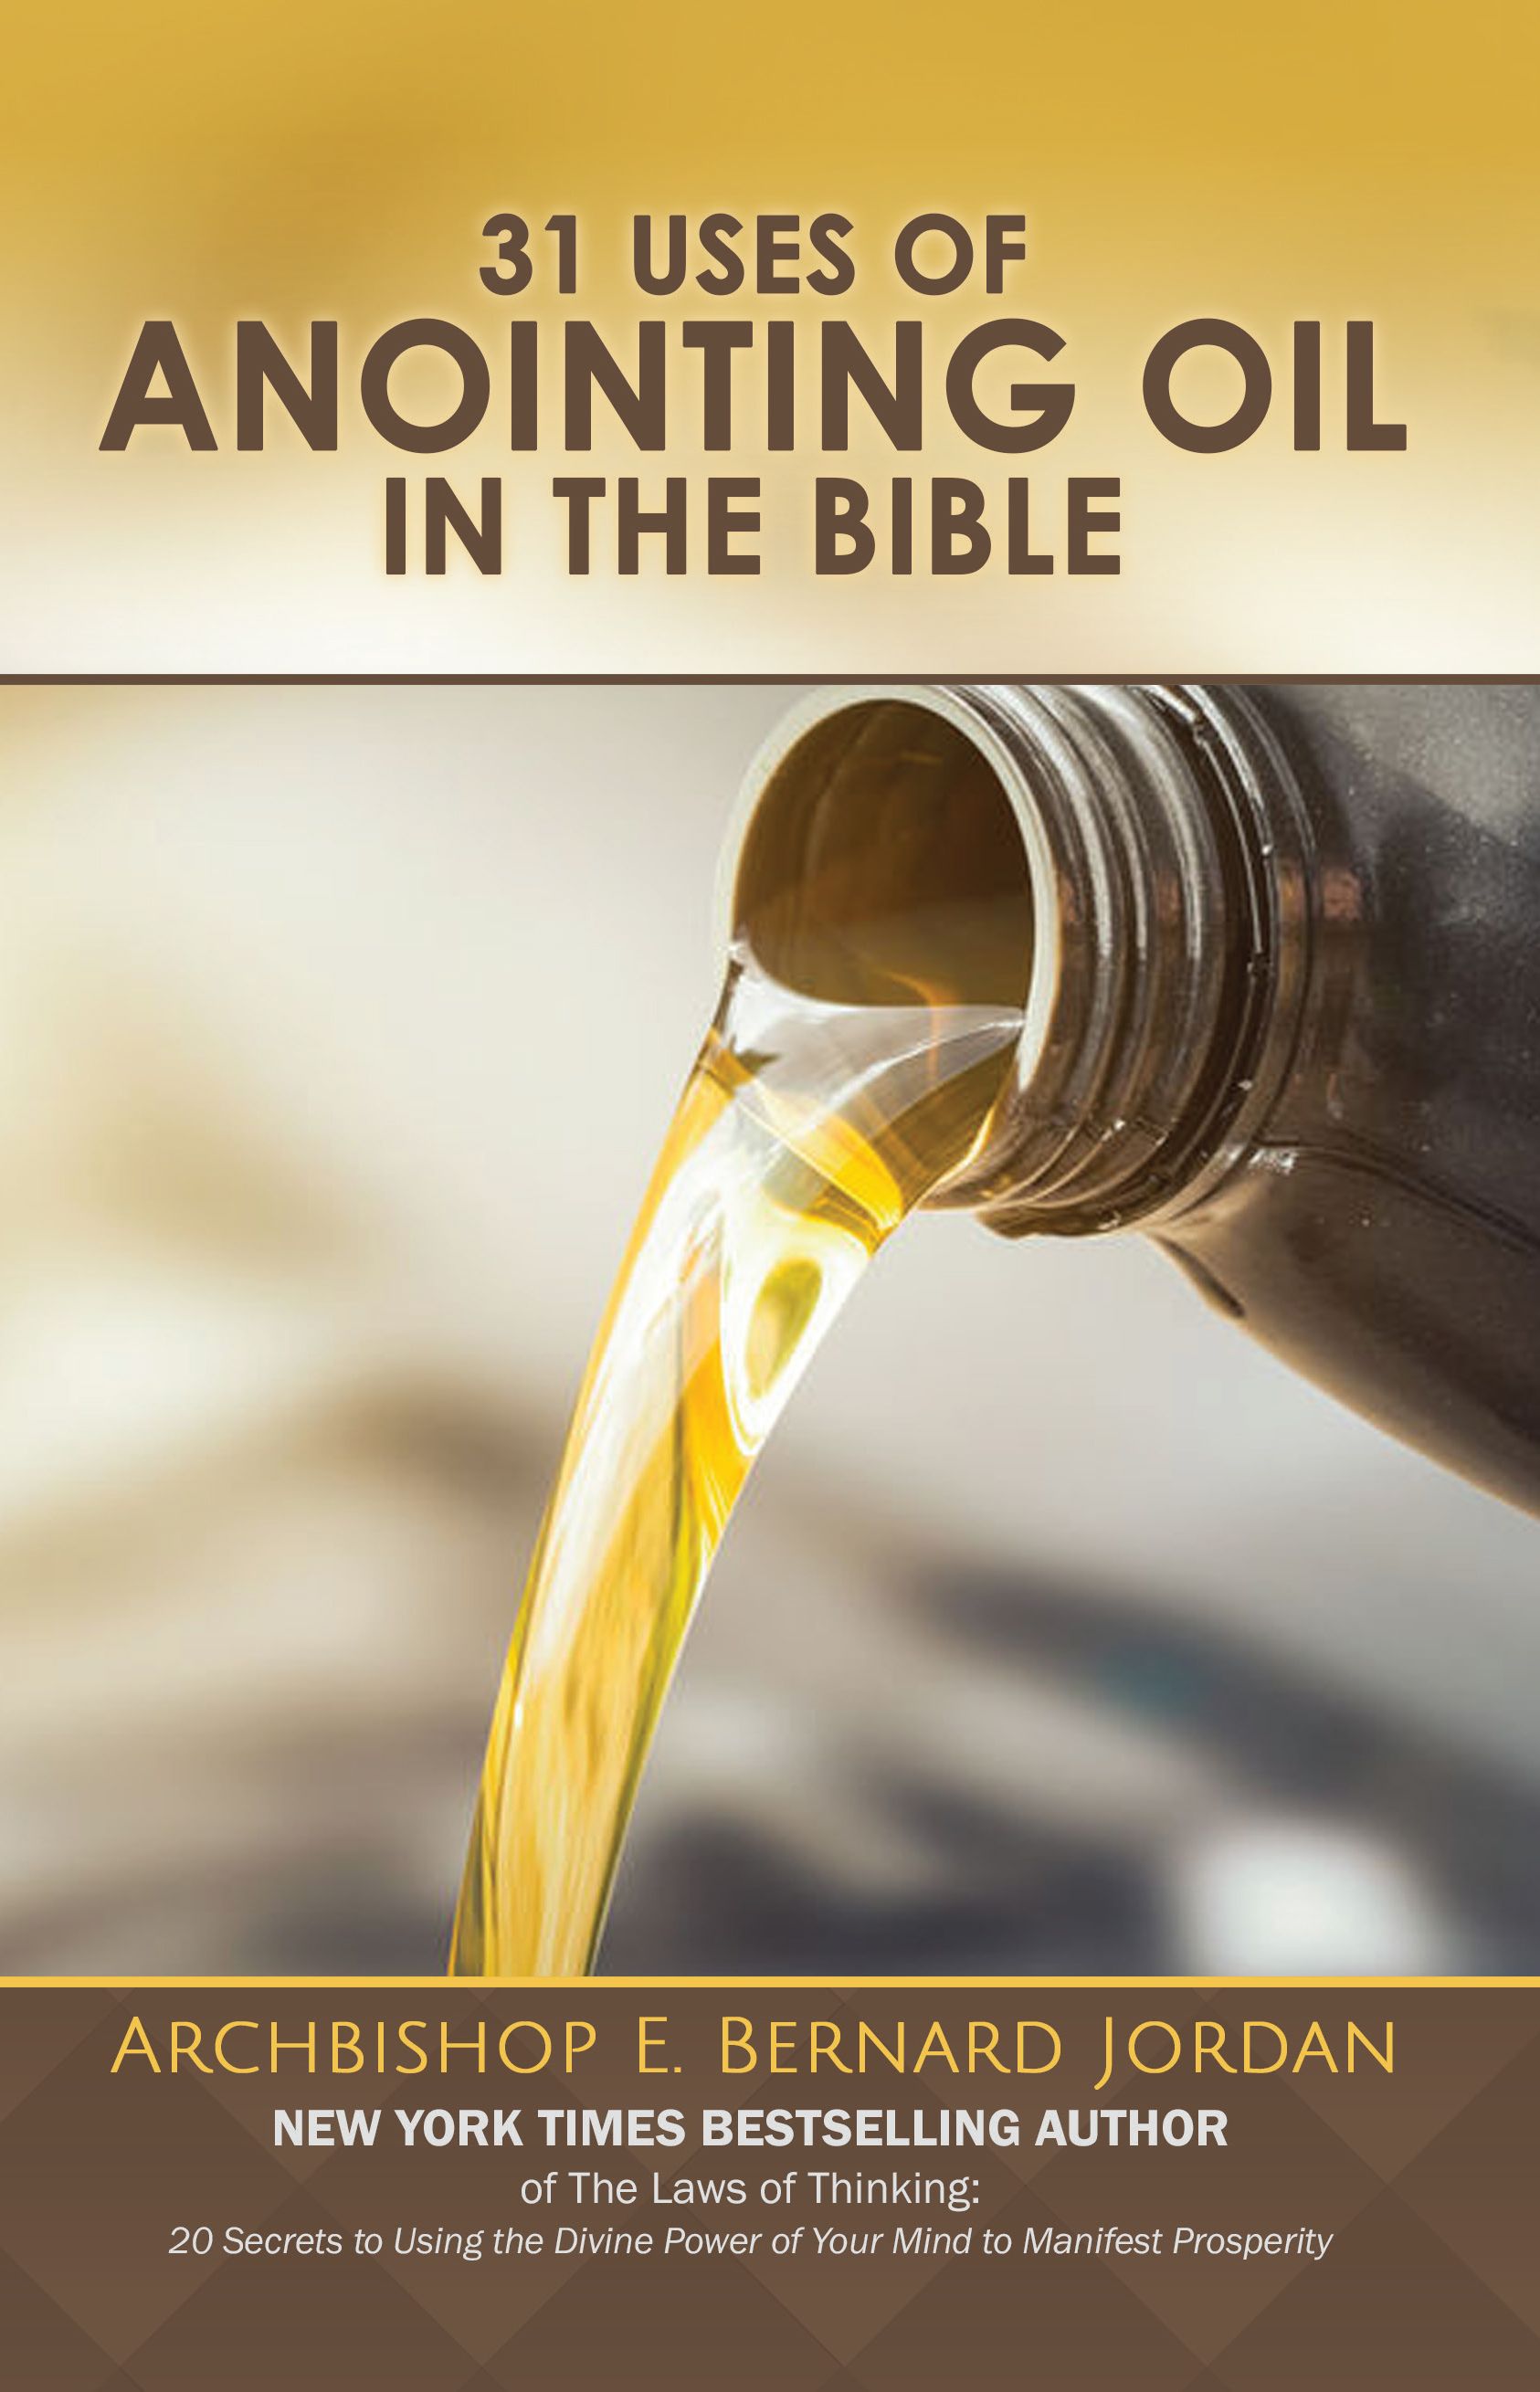 31 Uses of the Anointing in the Bible